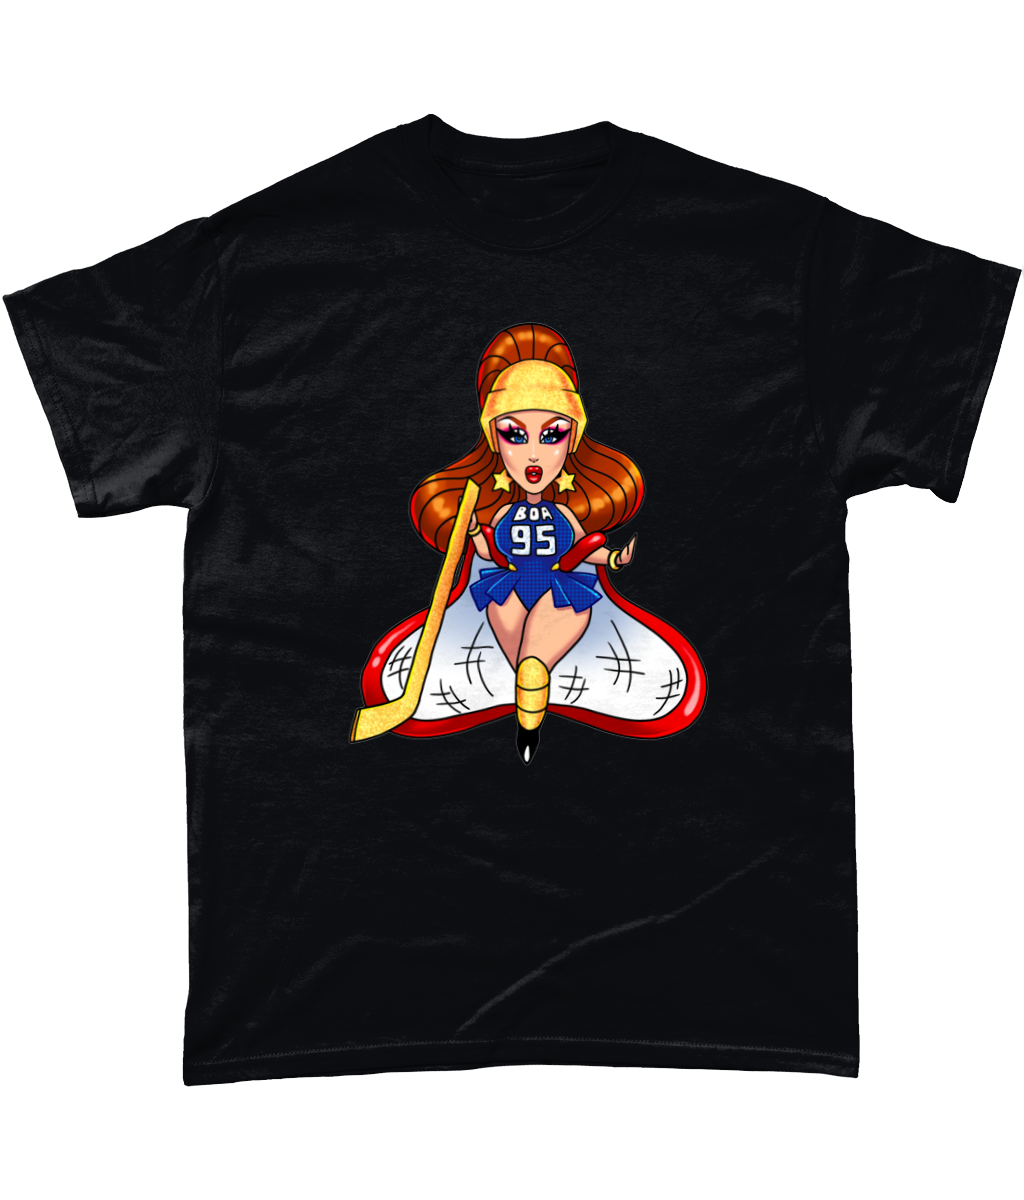 BOA - Hockey Queen Of The North T-Shirt - SNATCHED MERCH